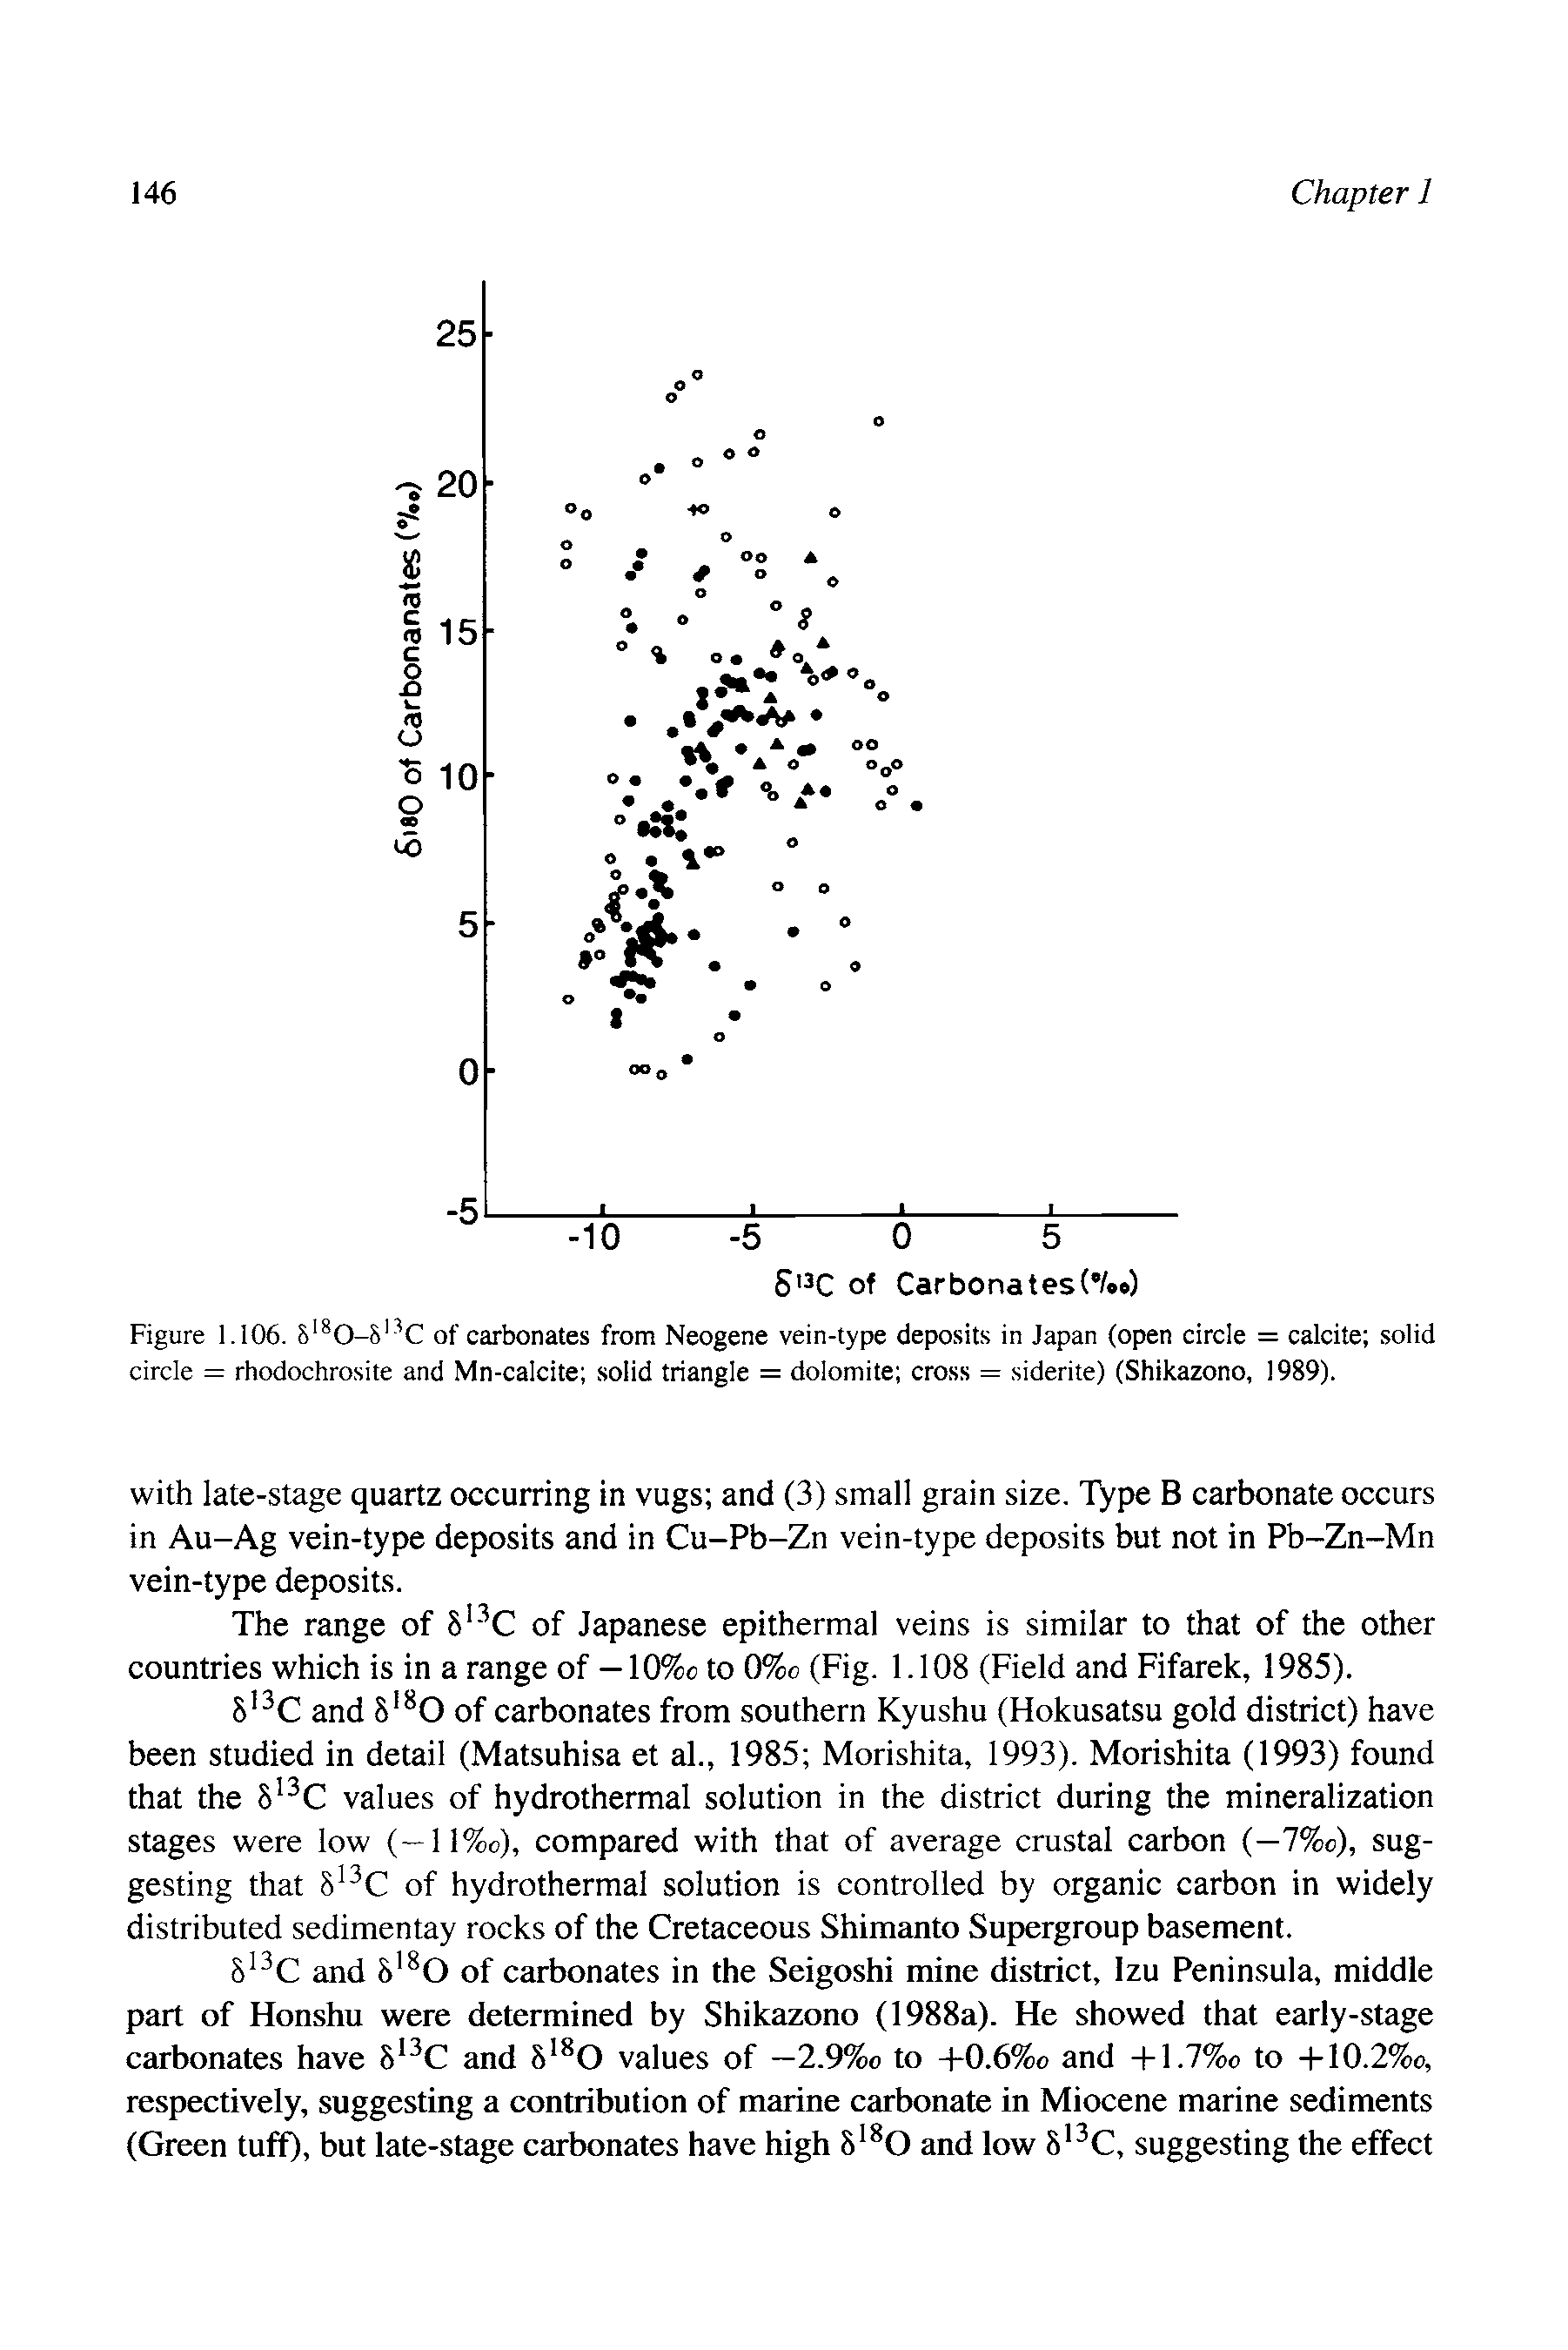 Figure 1.106. S 0-8 C of carbonates from Neogene vein-type deposits in Japan (open circle = calcite solid circle = rhodochrosite and Mn-calcite solid triangle = dolomite cross = siderite) (Shikazono, 1989).